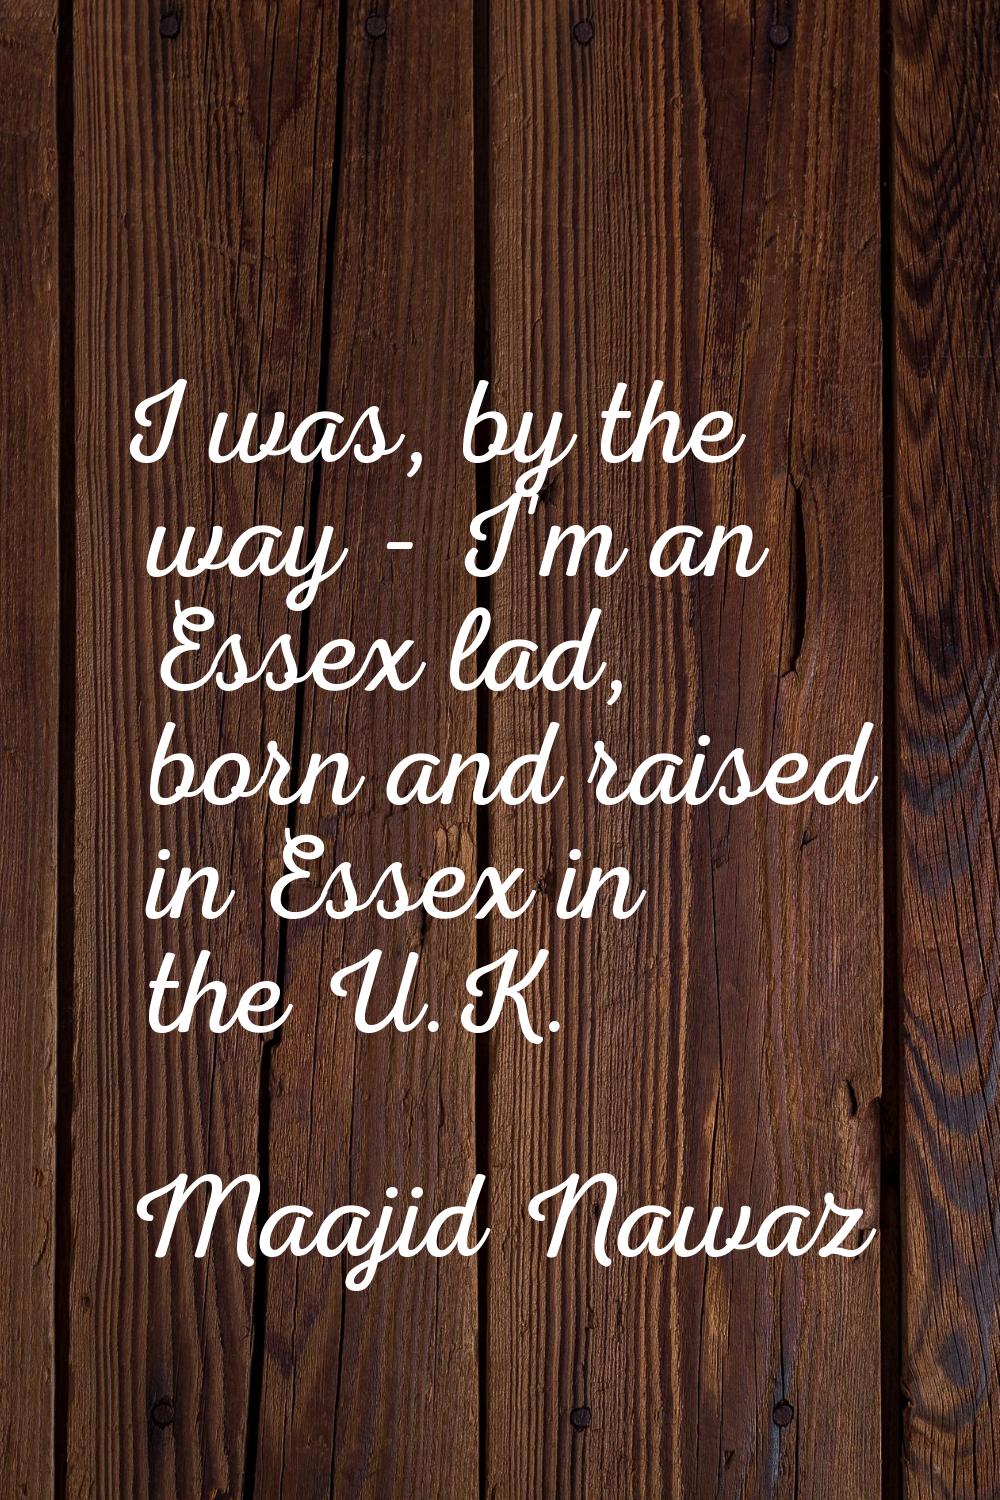 I was, by the way - I'm an Essex lad, born and raised in Essex in the U.K.